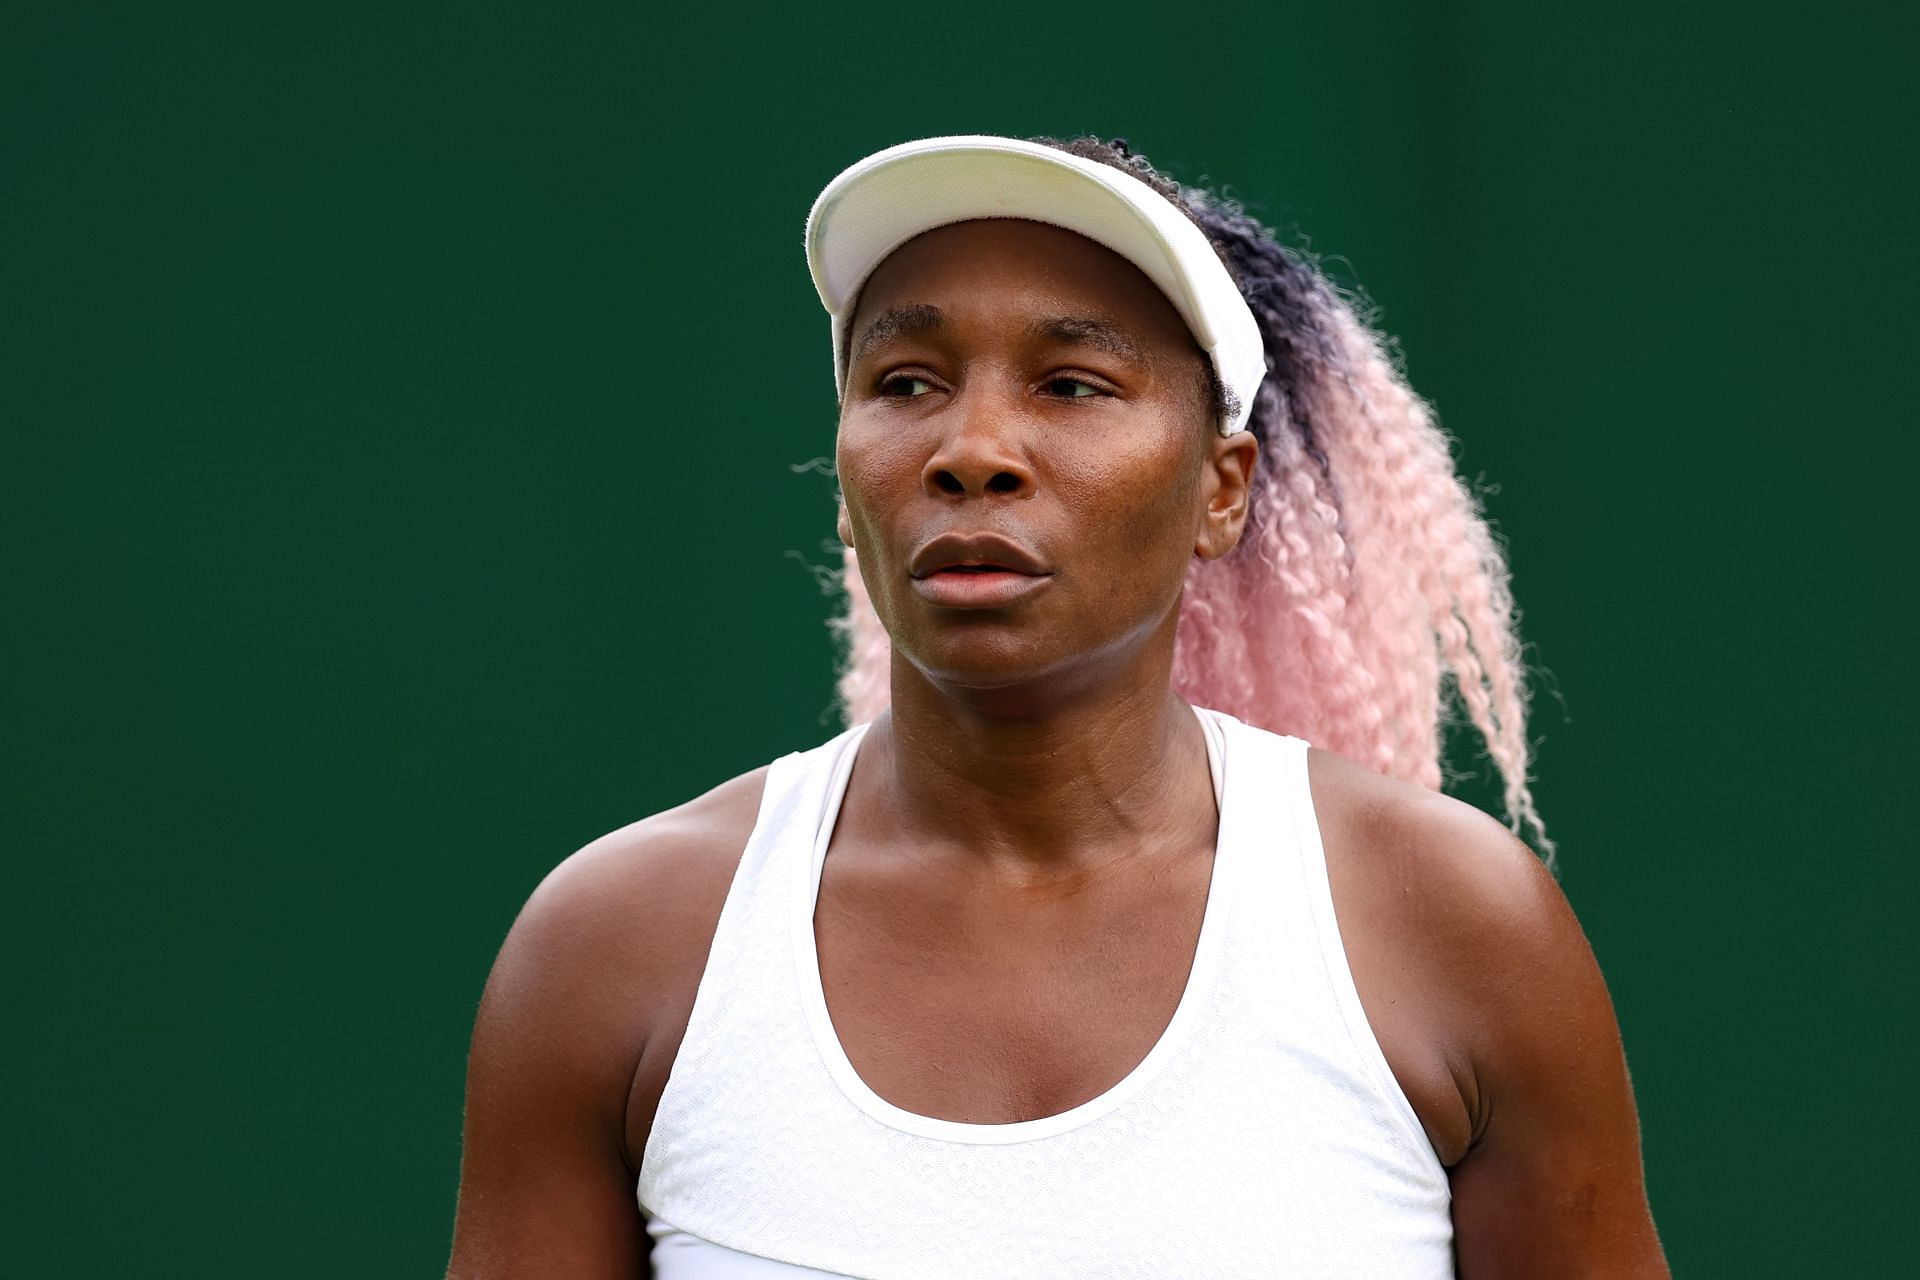 “Just hang up that racket for God’s sake” - Fans react as 44-year-old Venus Williams returns to court for practice session